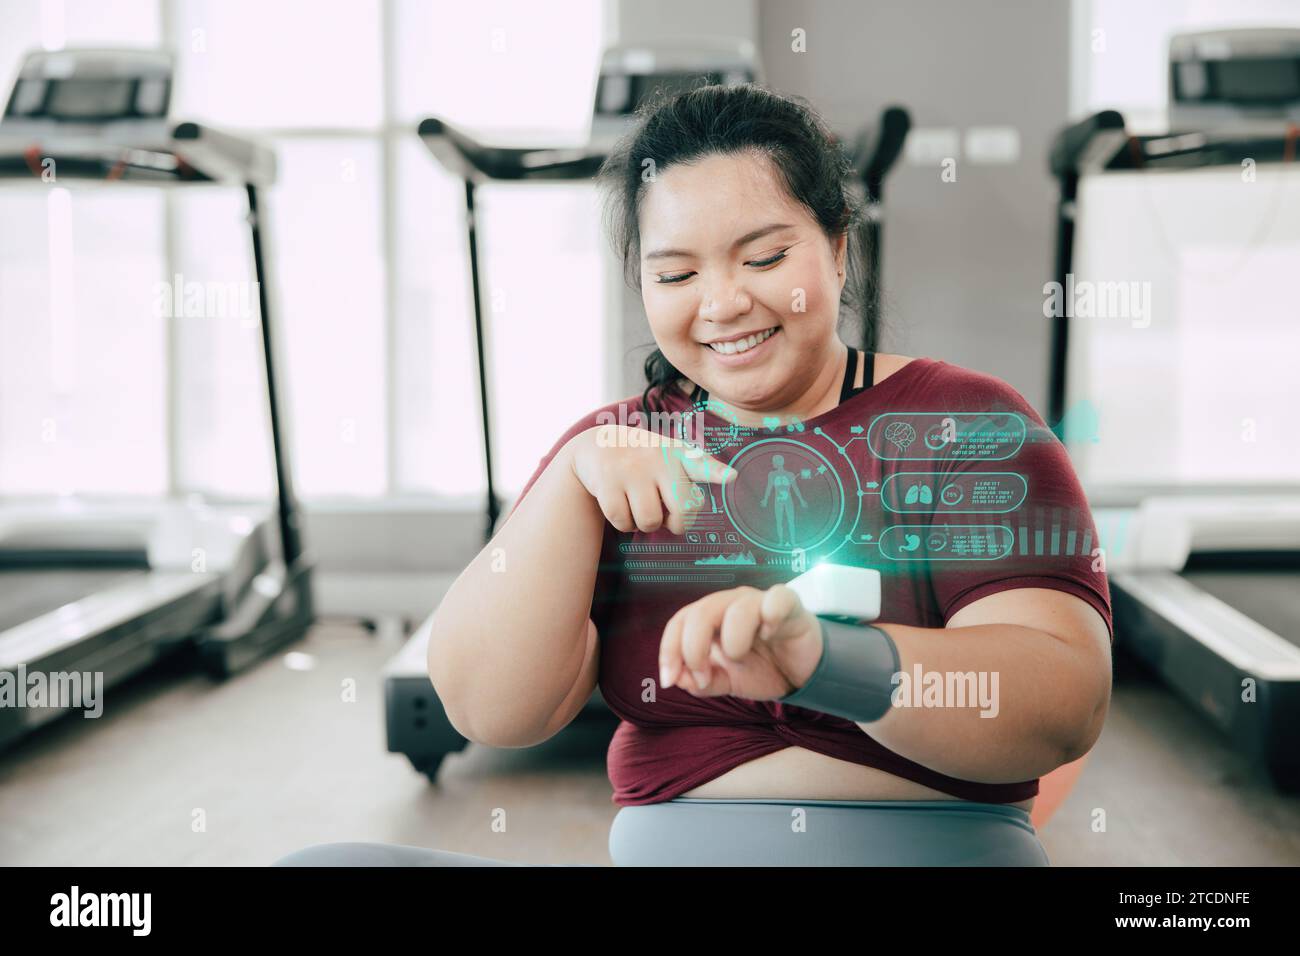 healthy fat women happy using smart wearable science technology device fitness trackers display hologram body insight activity information. Stock Photo